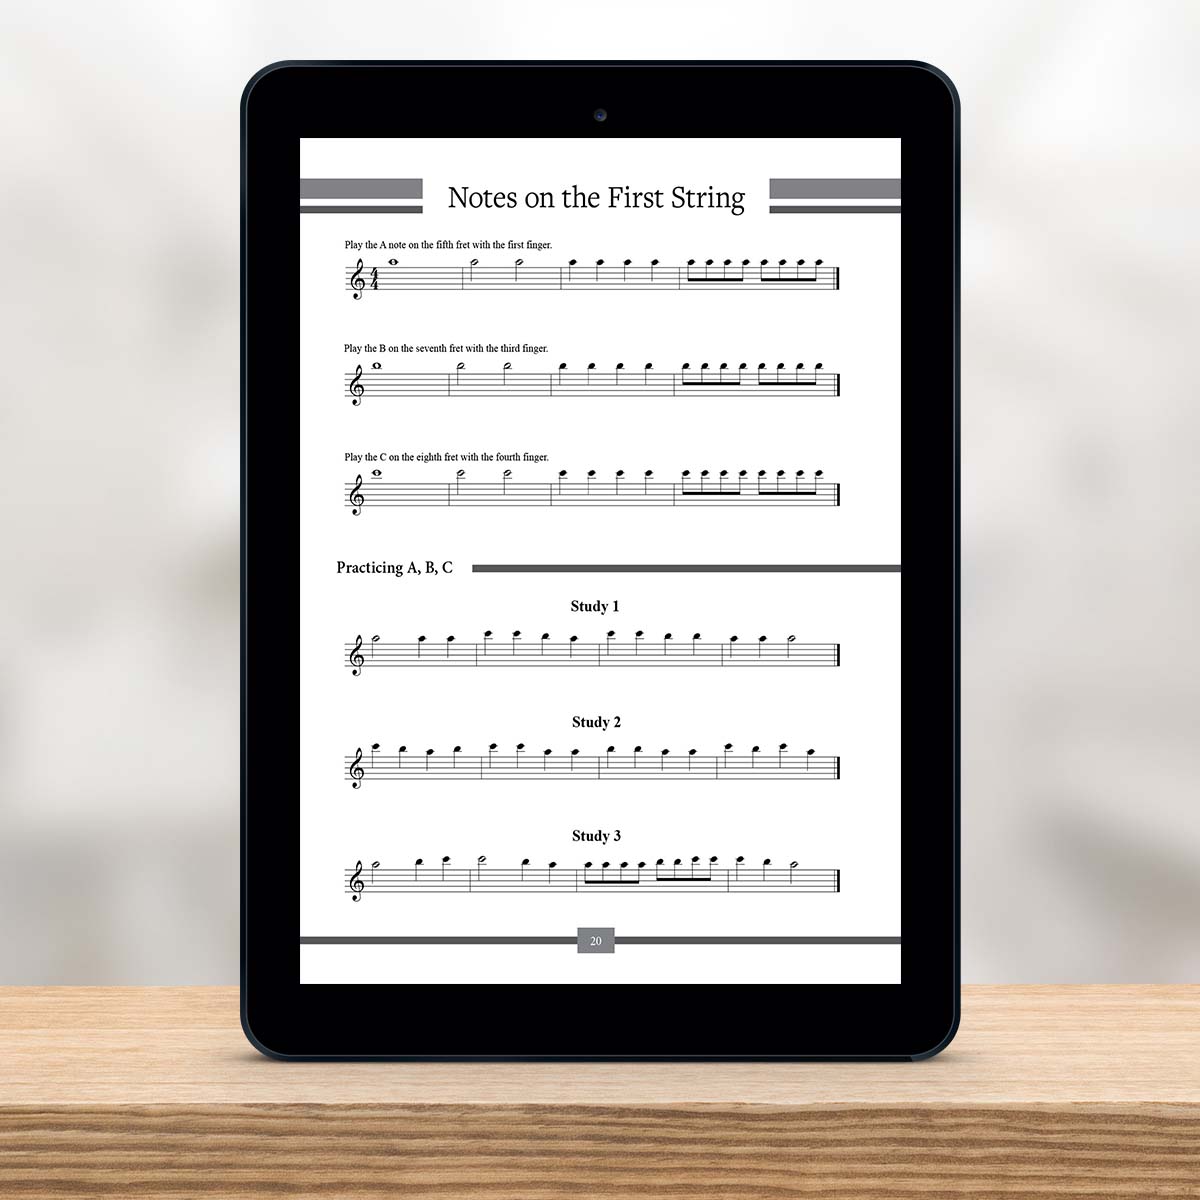 Digital Tablet showing a page from The Missing Method for Guitar Note Reading Series Book 2 by Christian Triola